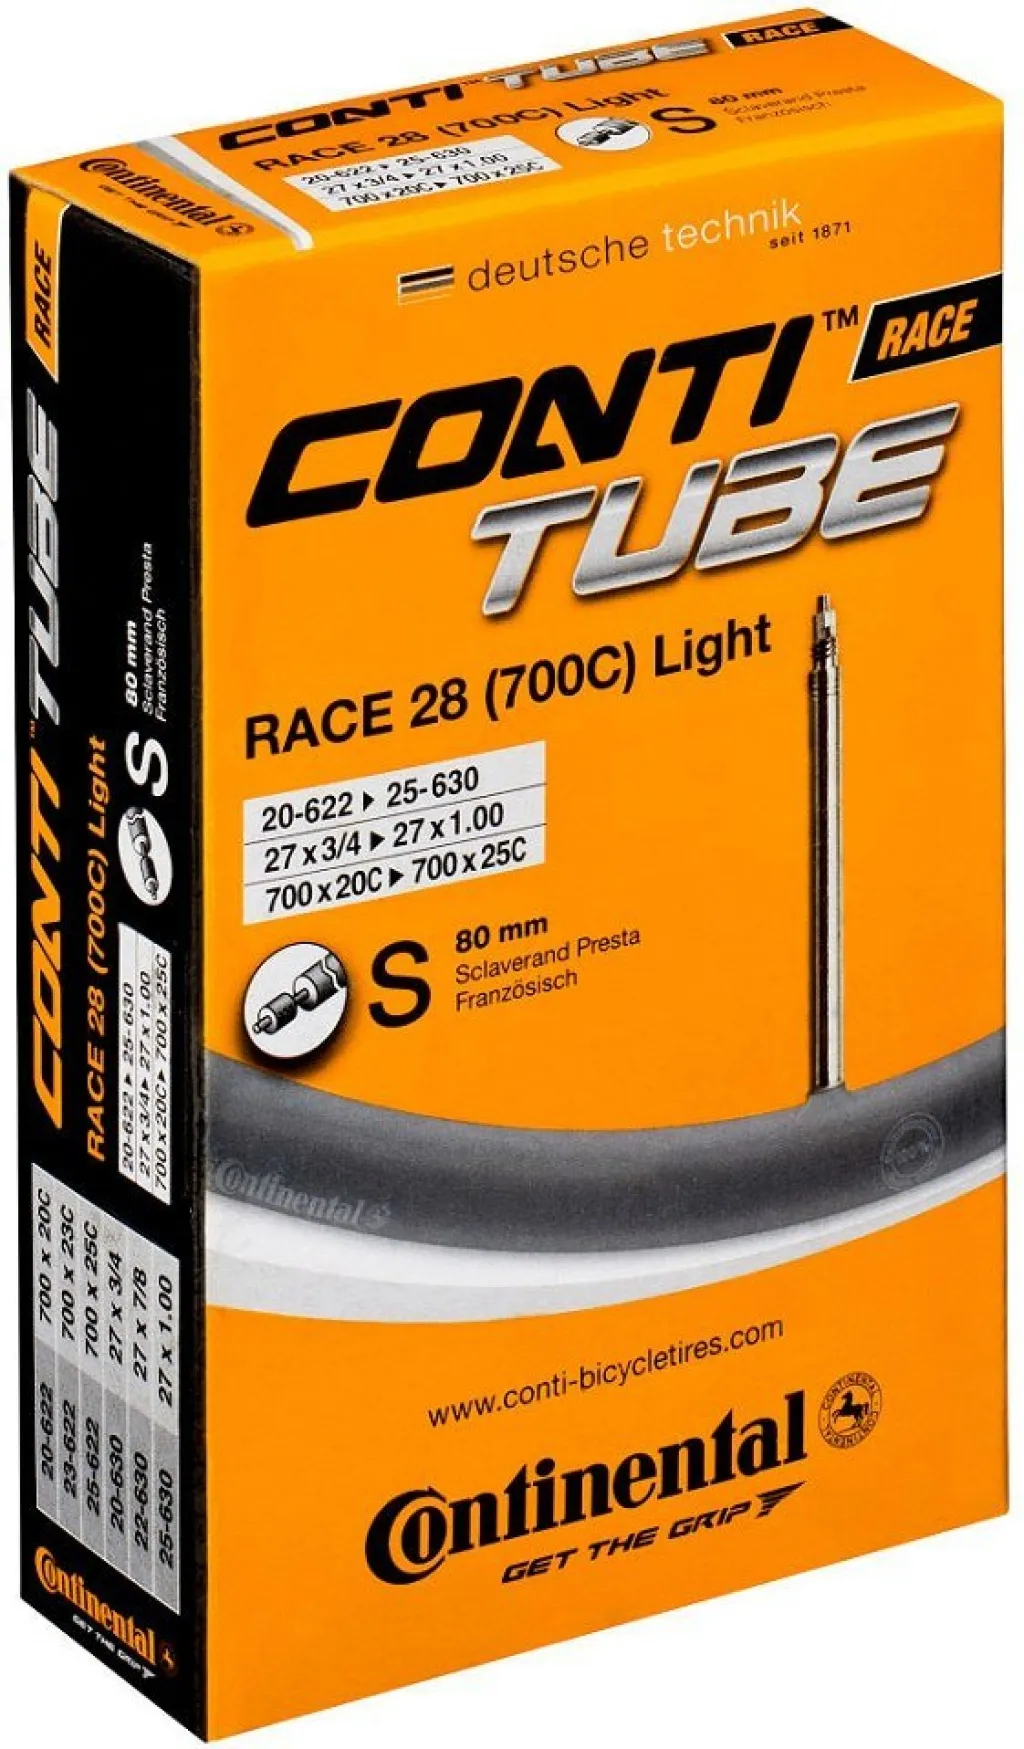 Камера 28" Continental Race Tube S80 (20-622->25-630) (105g)